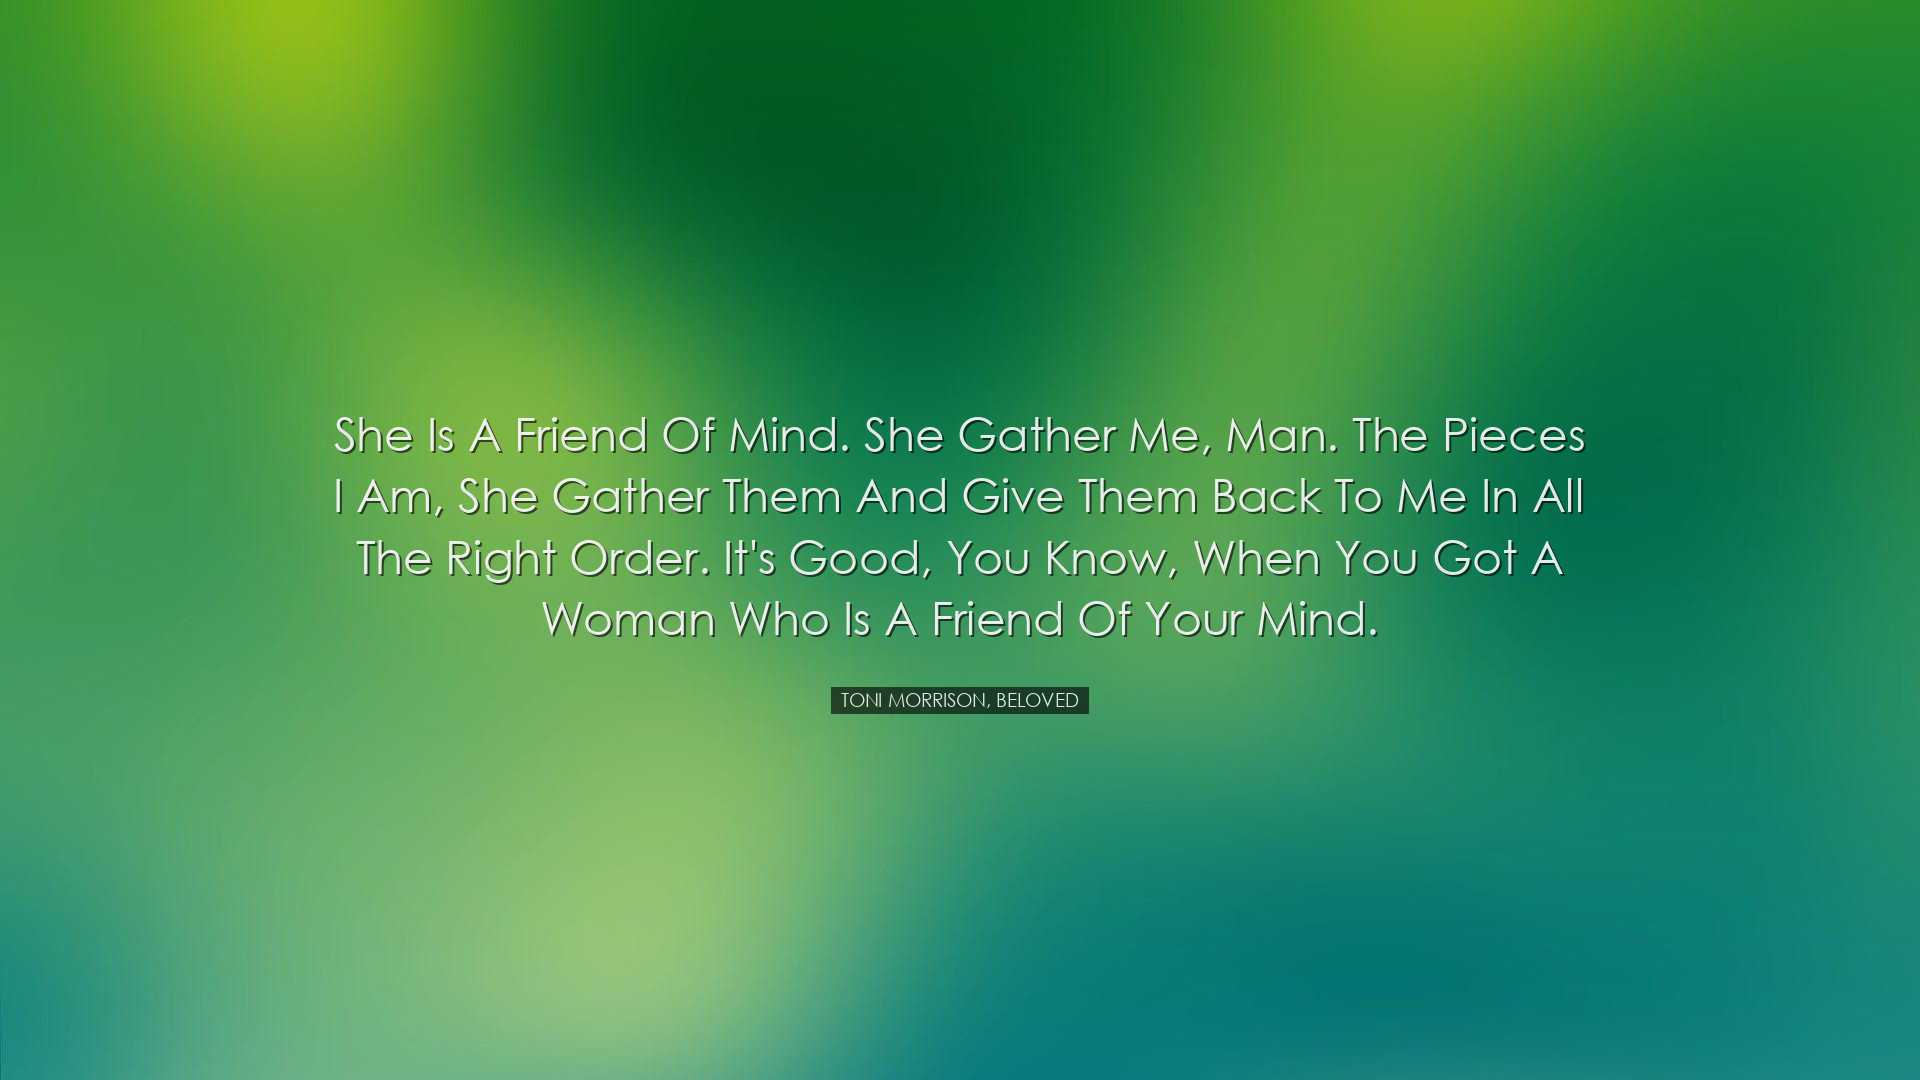 She is a friend of mind. She gather me, man. The pieces I am, she